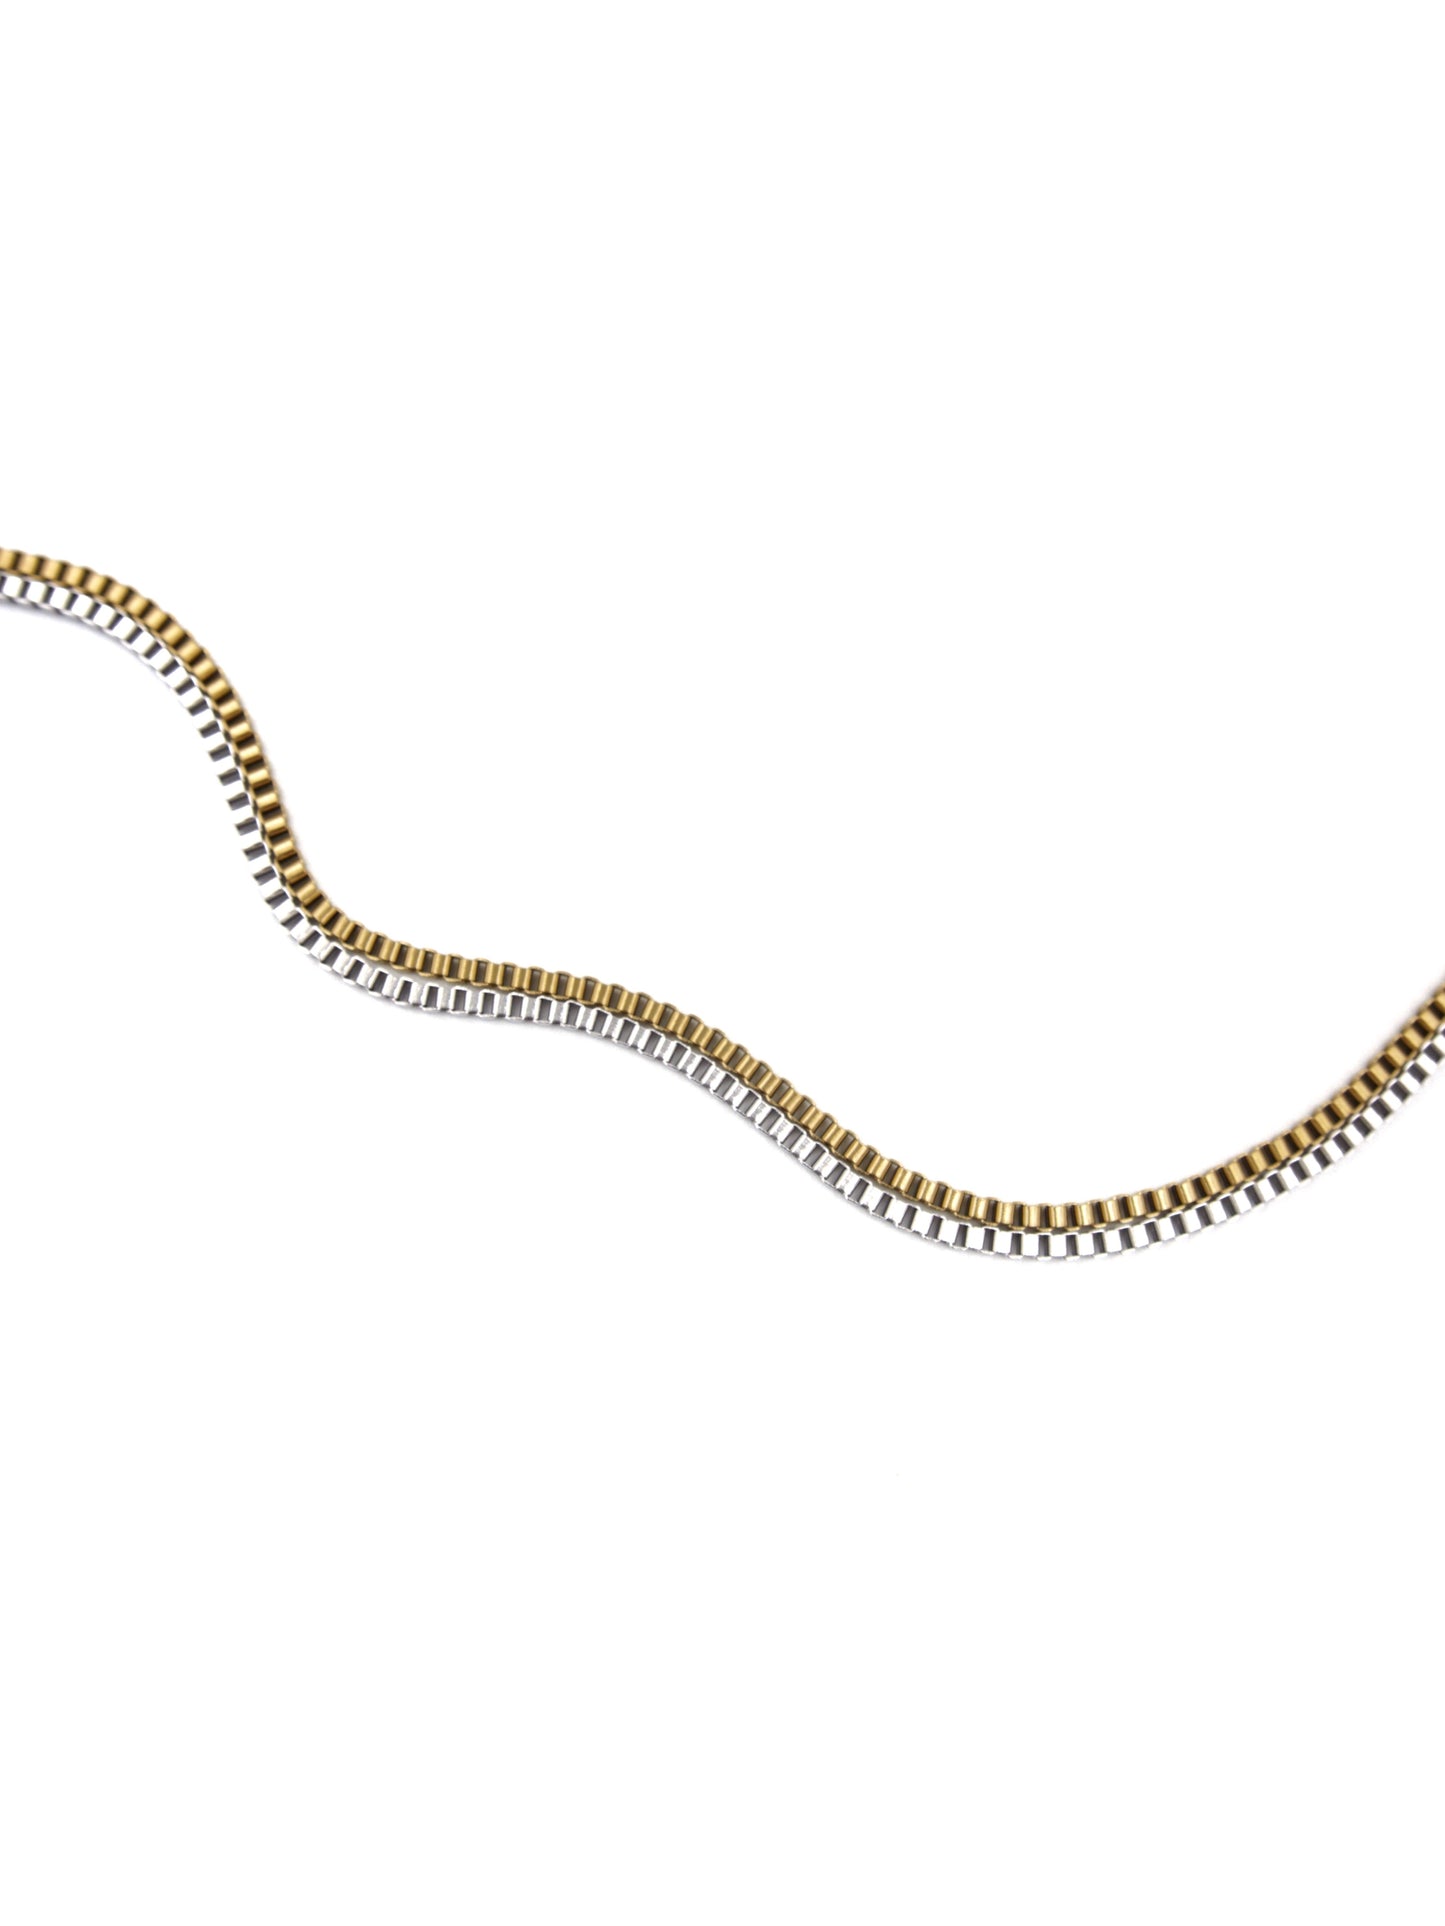 Basic 3mm Square Chain Necklace